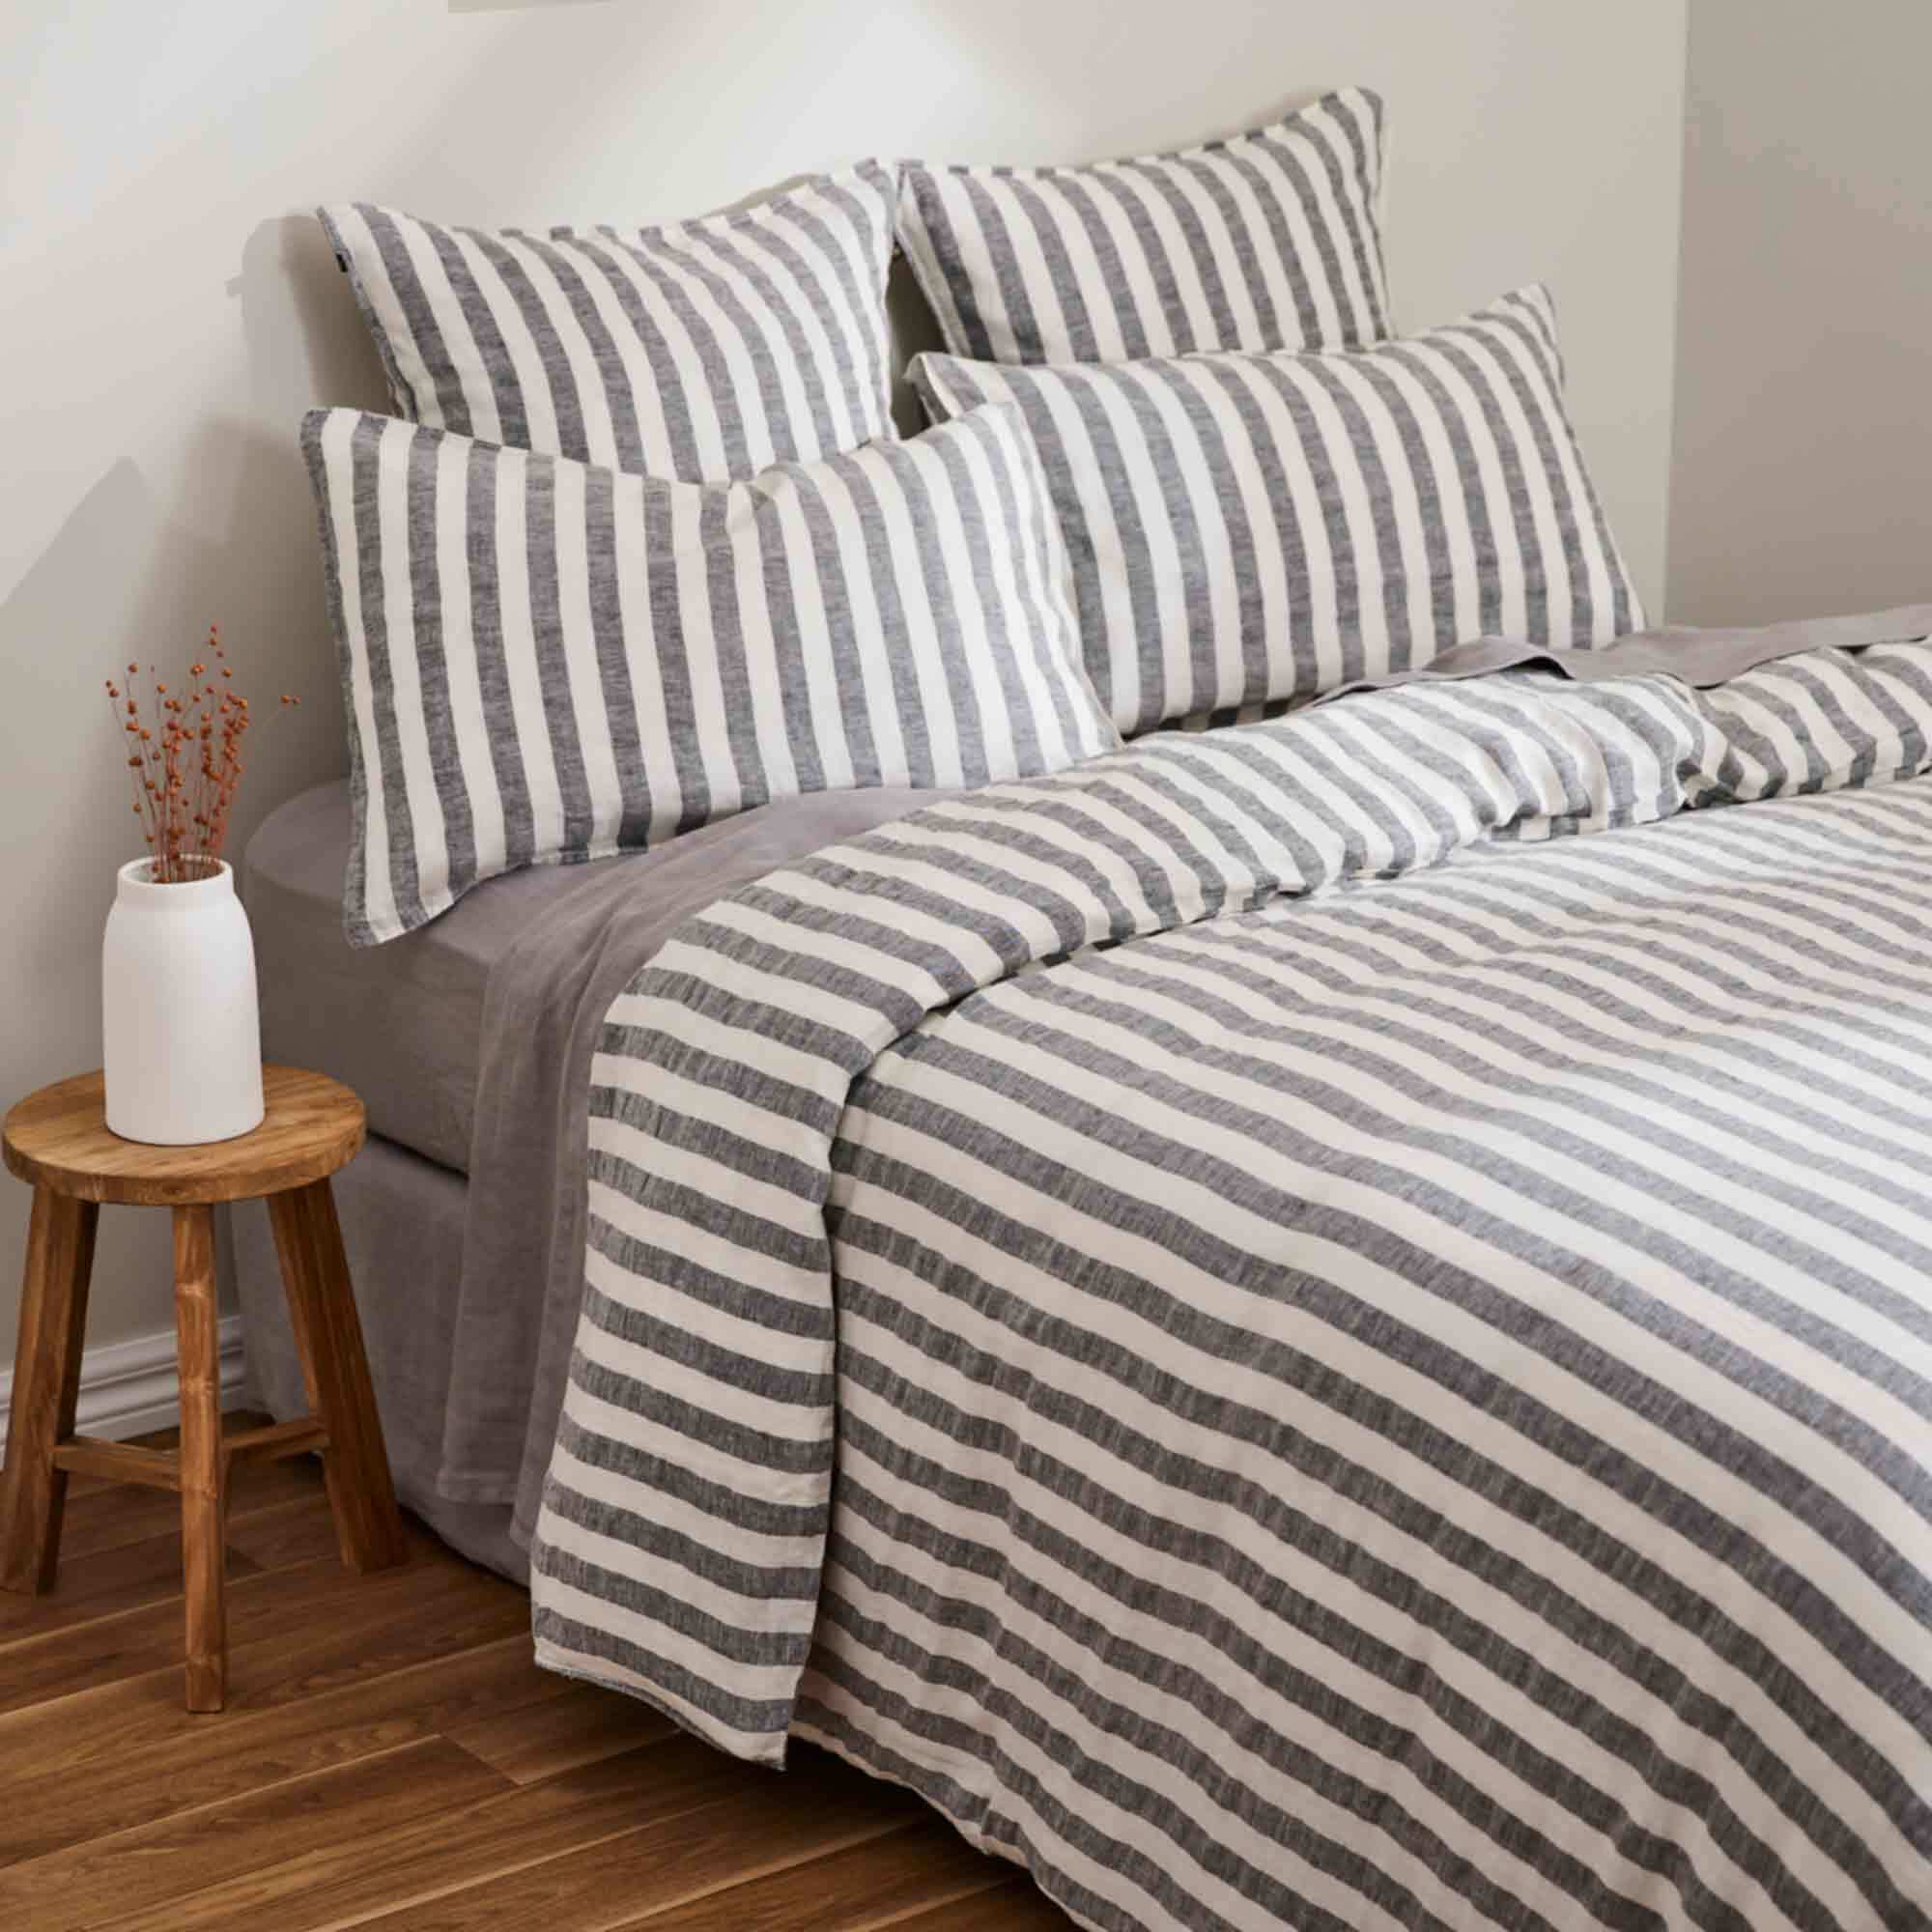 Hotel At Home Uno Stripe French Linen Duvet Cover Set